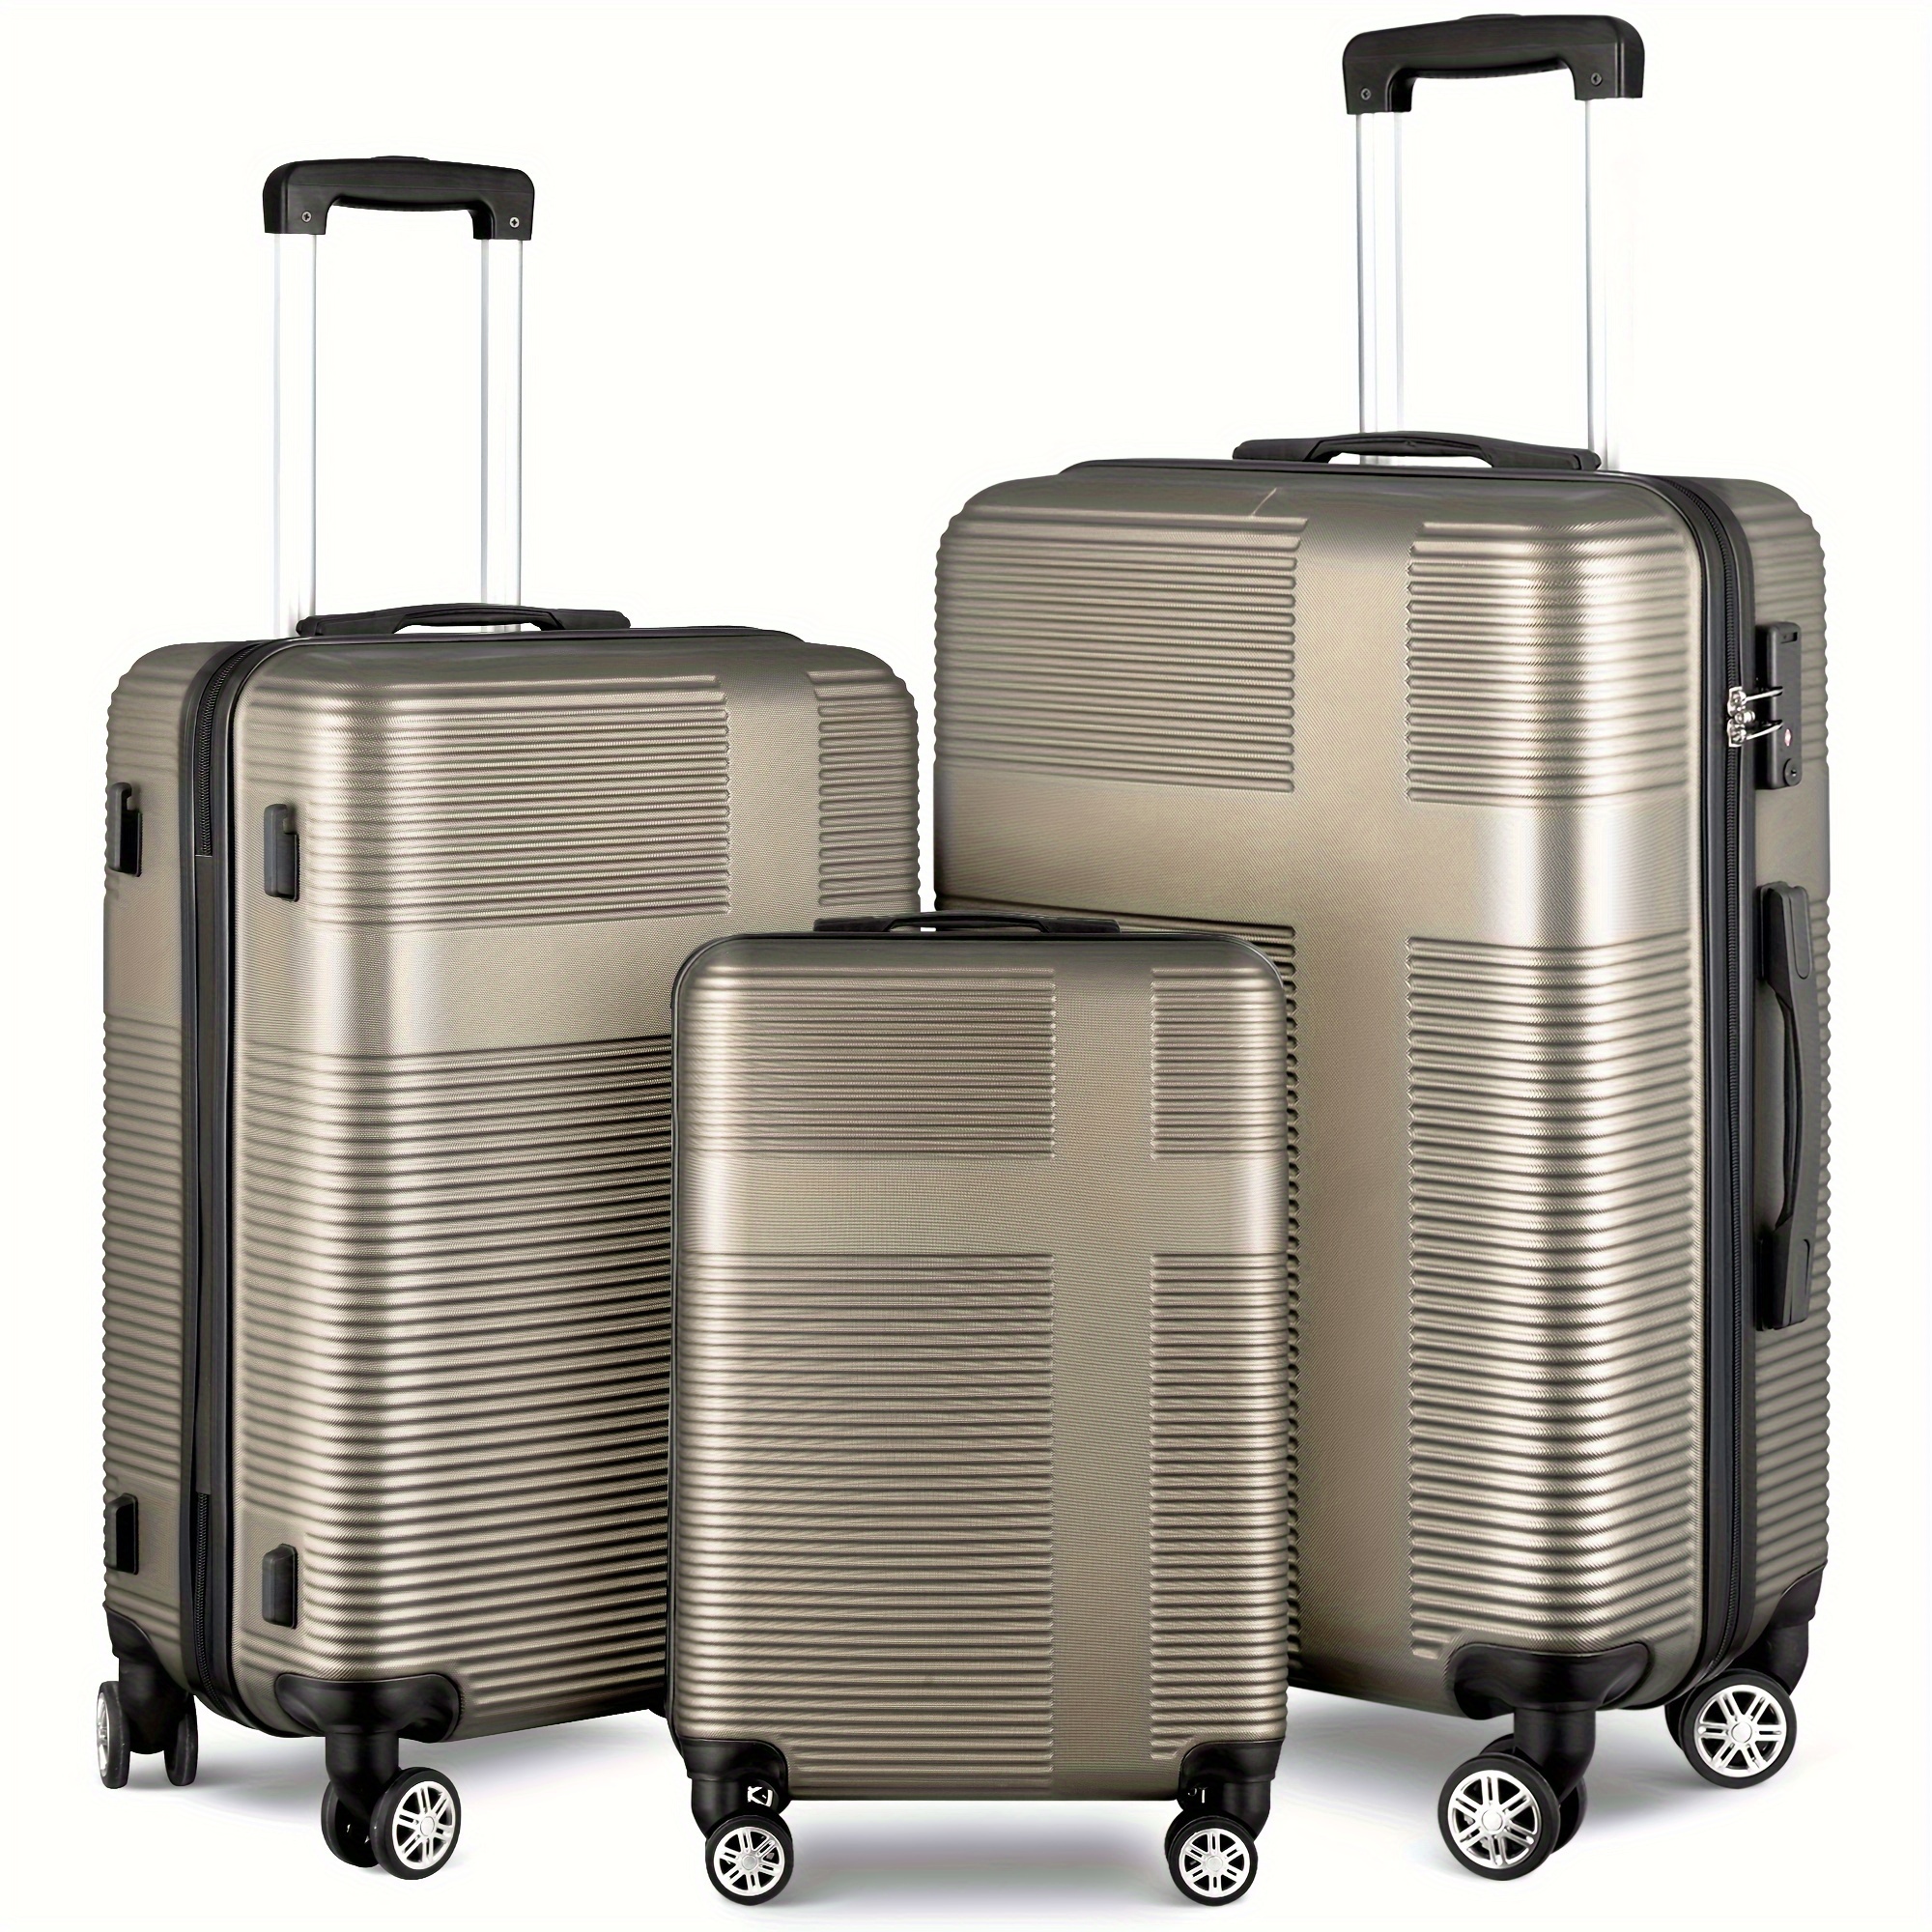 

3-piece Champagne Hardside Luggage Set, 20/24/28 Inch Suitcases, Fashionable Travel Trolley Cases With 360° Spinner Wheels, Telescoping Handle, Nested Storage - Stylish Travel Gear